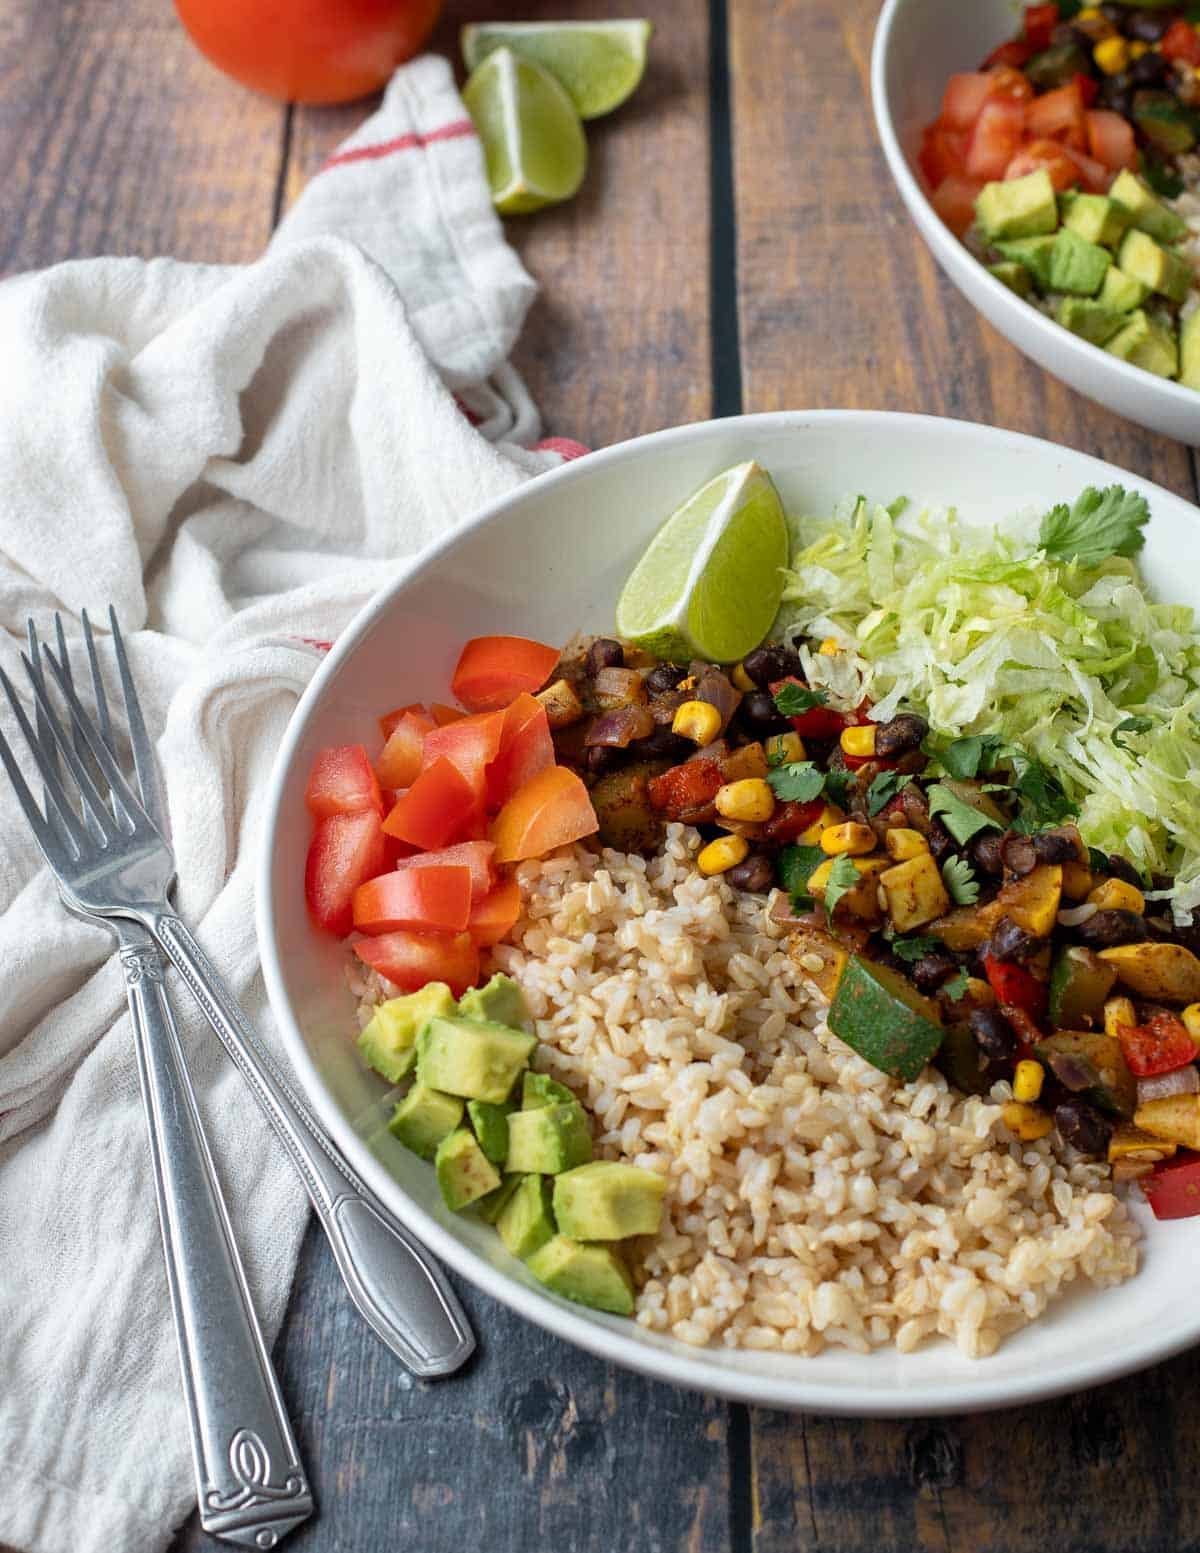 Vegan burrito bowl with brown rice, mixed vegetables, shredded lettuce, tomatoes, and avocados.